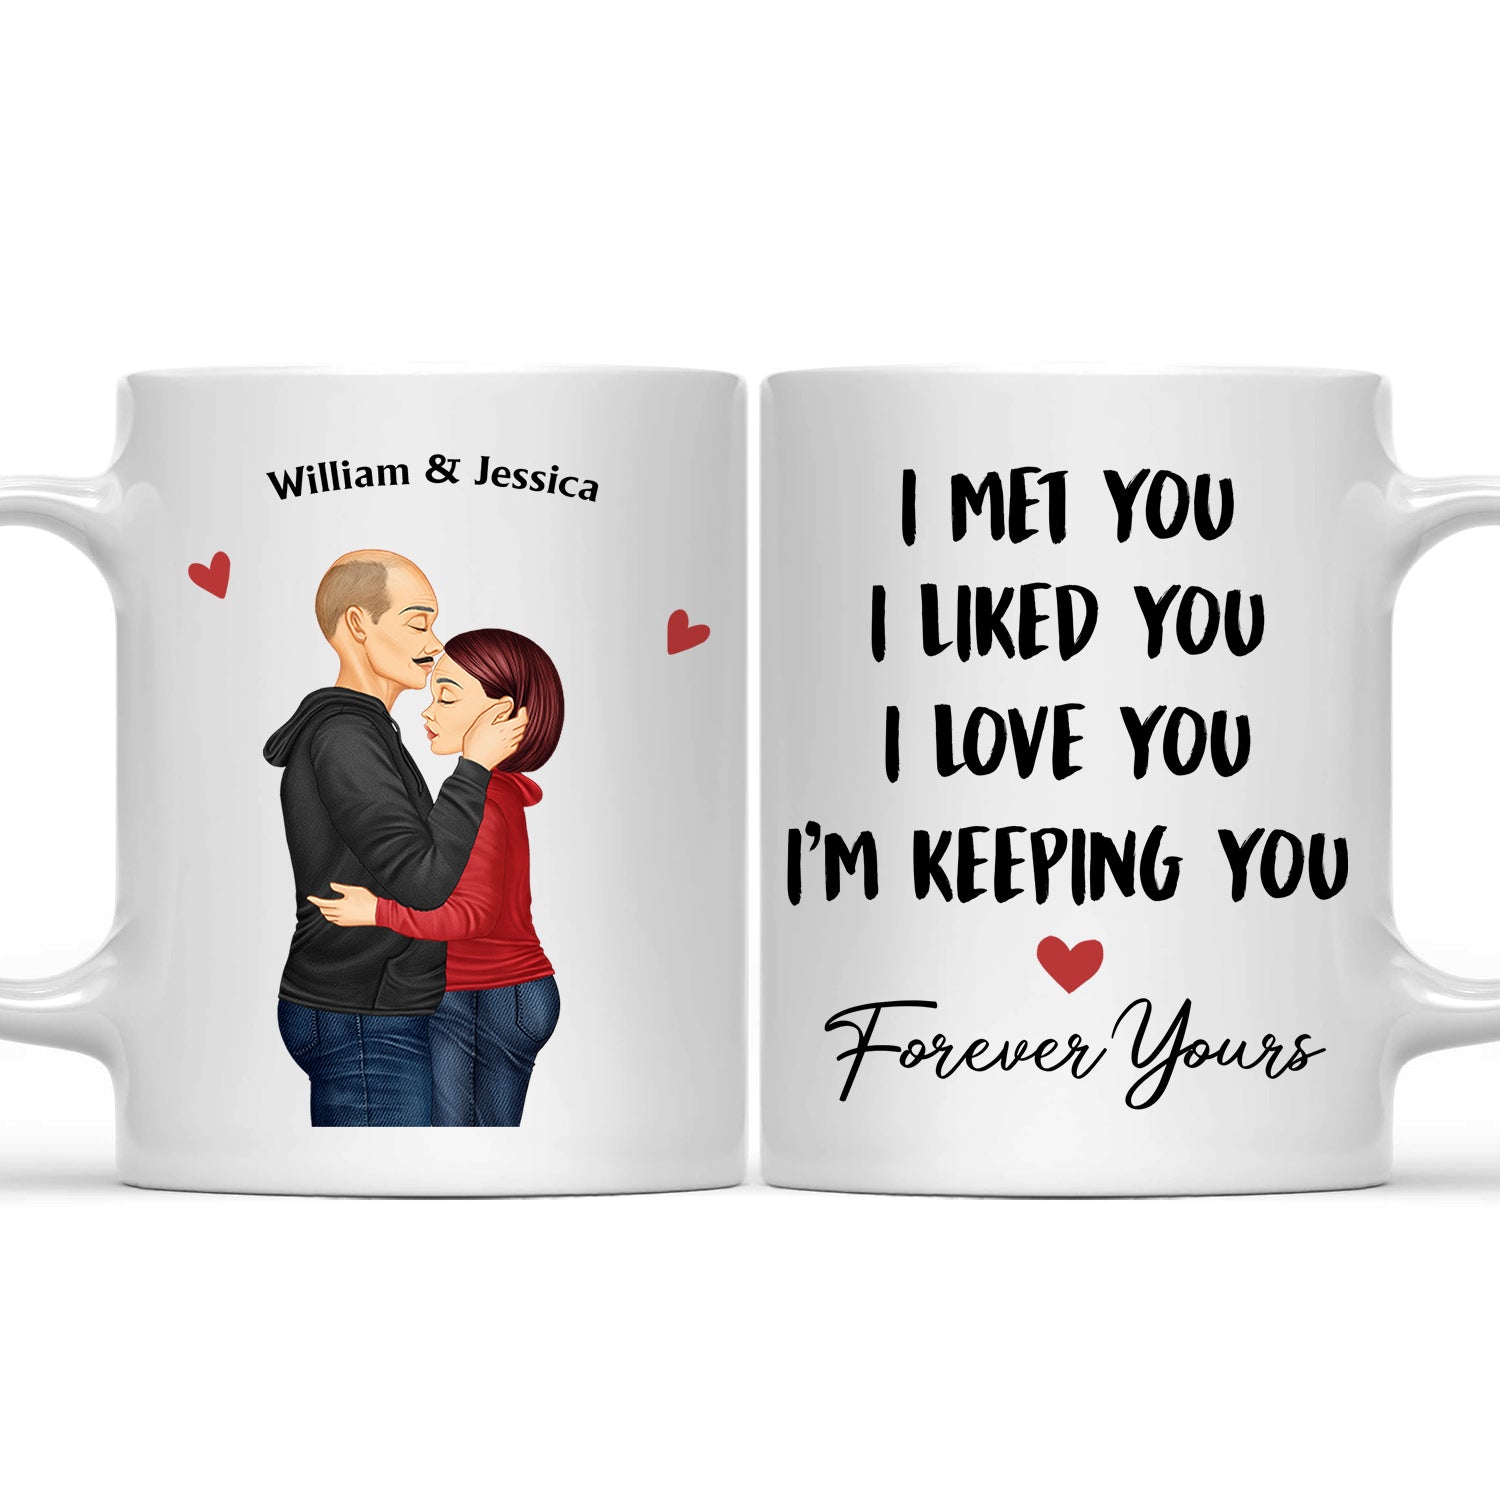 I Met You I Liked You I Love You Keeping You Hugging Couple - Birthday, Loving, Anniversary Gift For Spouse, Hubby, Wifey, Boyfriend, Girlfriend - Personalized Mug